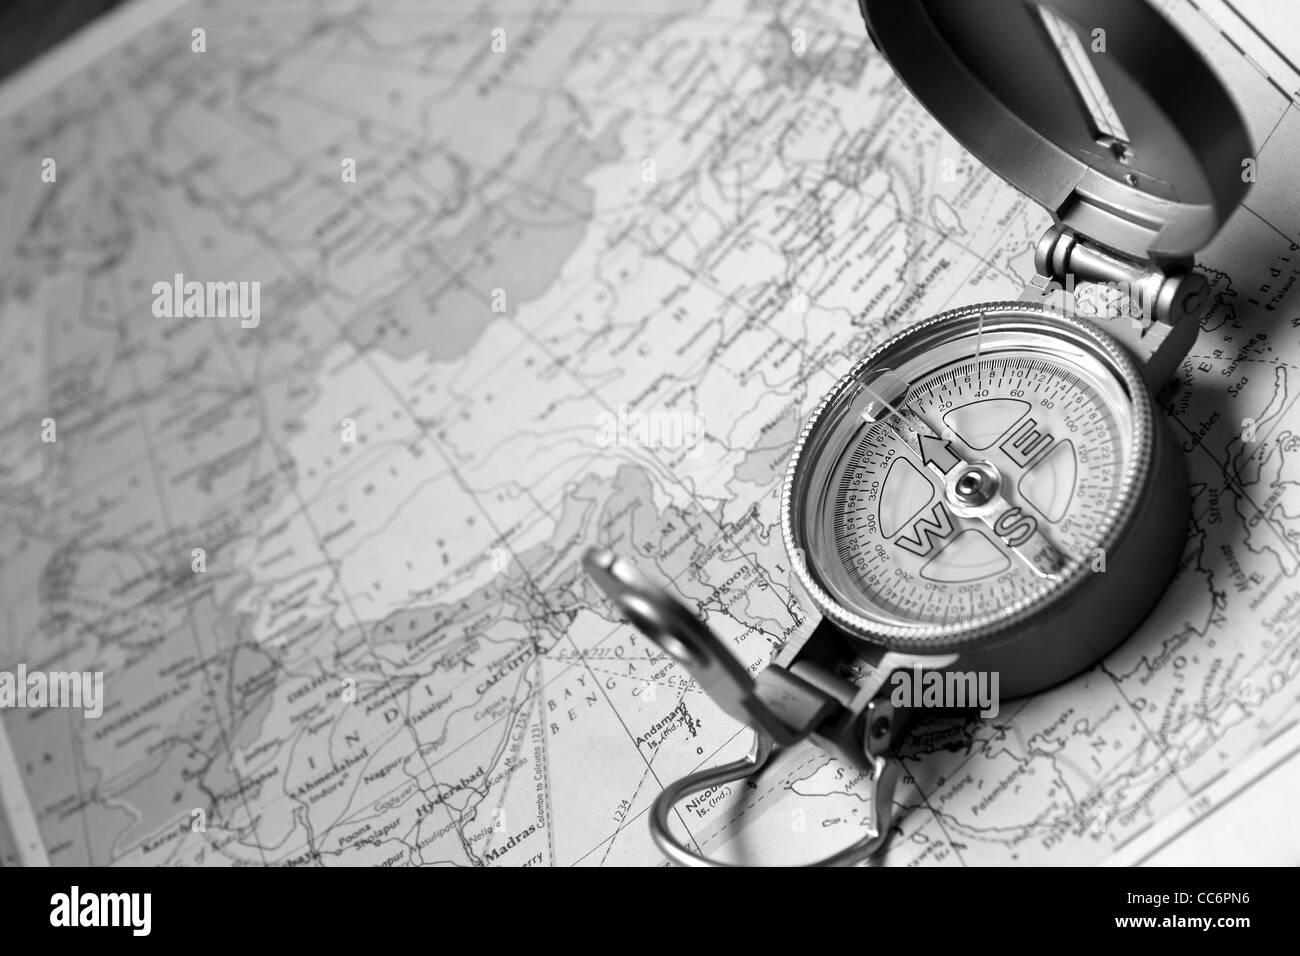 A compass on the world map of the atlas. Stock Photo